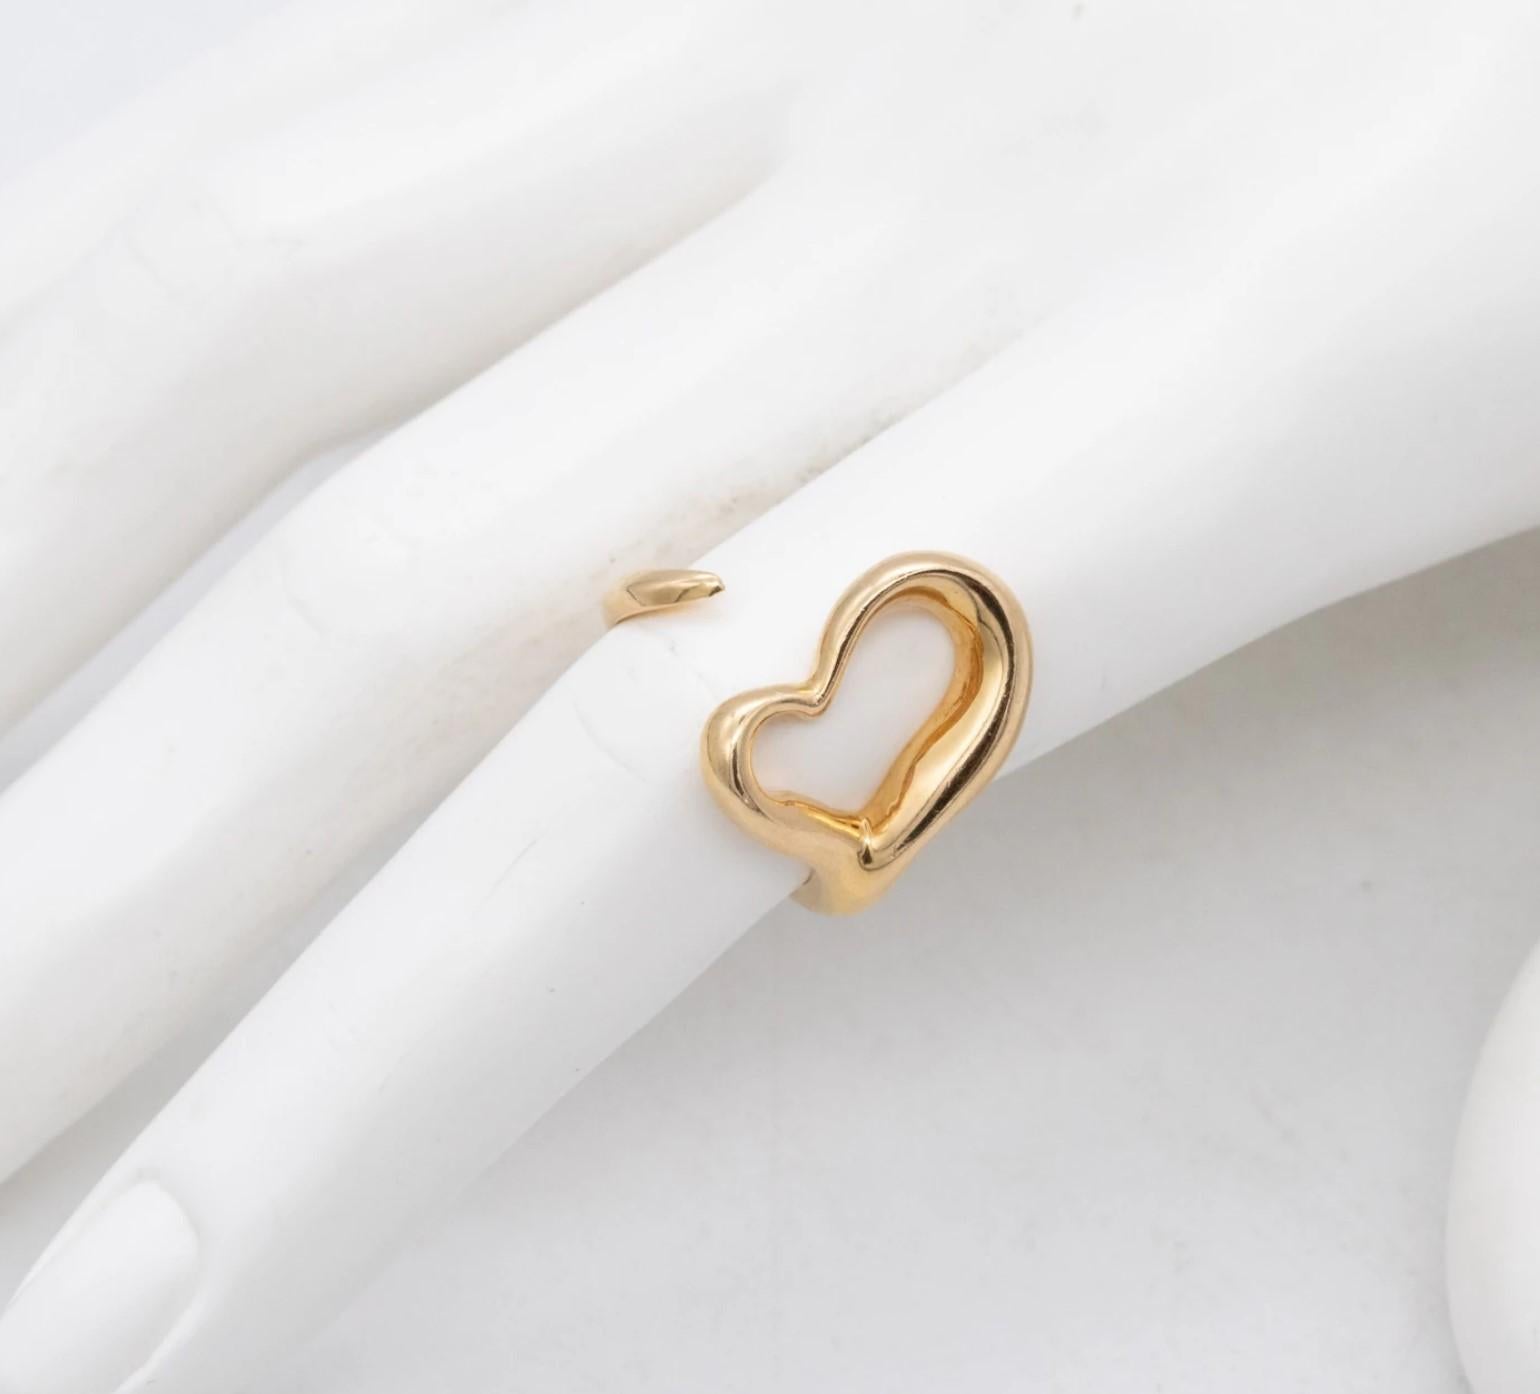 Tiffany & Co. 1980 Elsa Peretti Open Heart Ring Solid 18Kt Gold Size 6-6.5 2